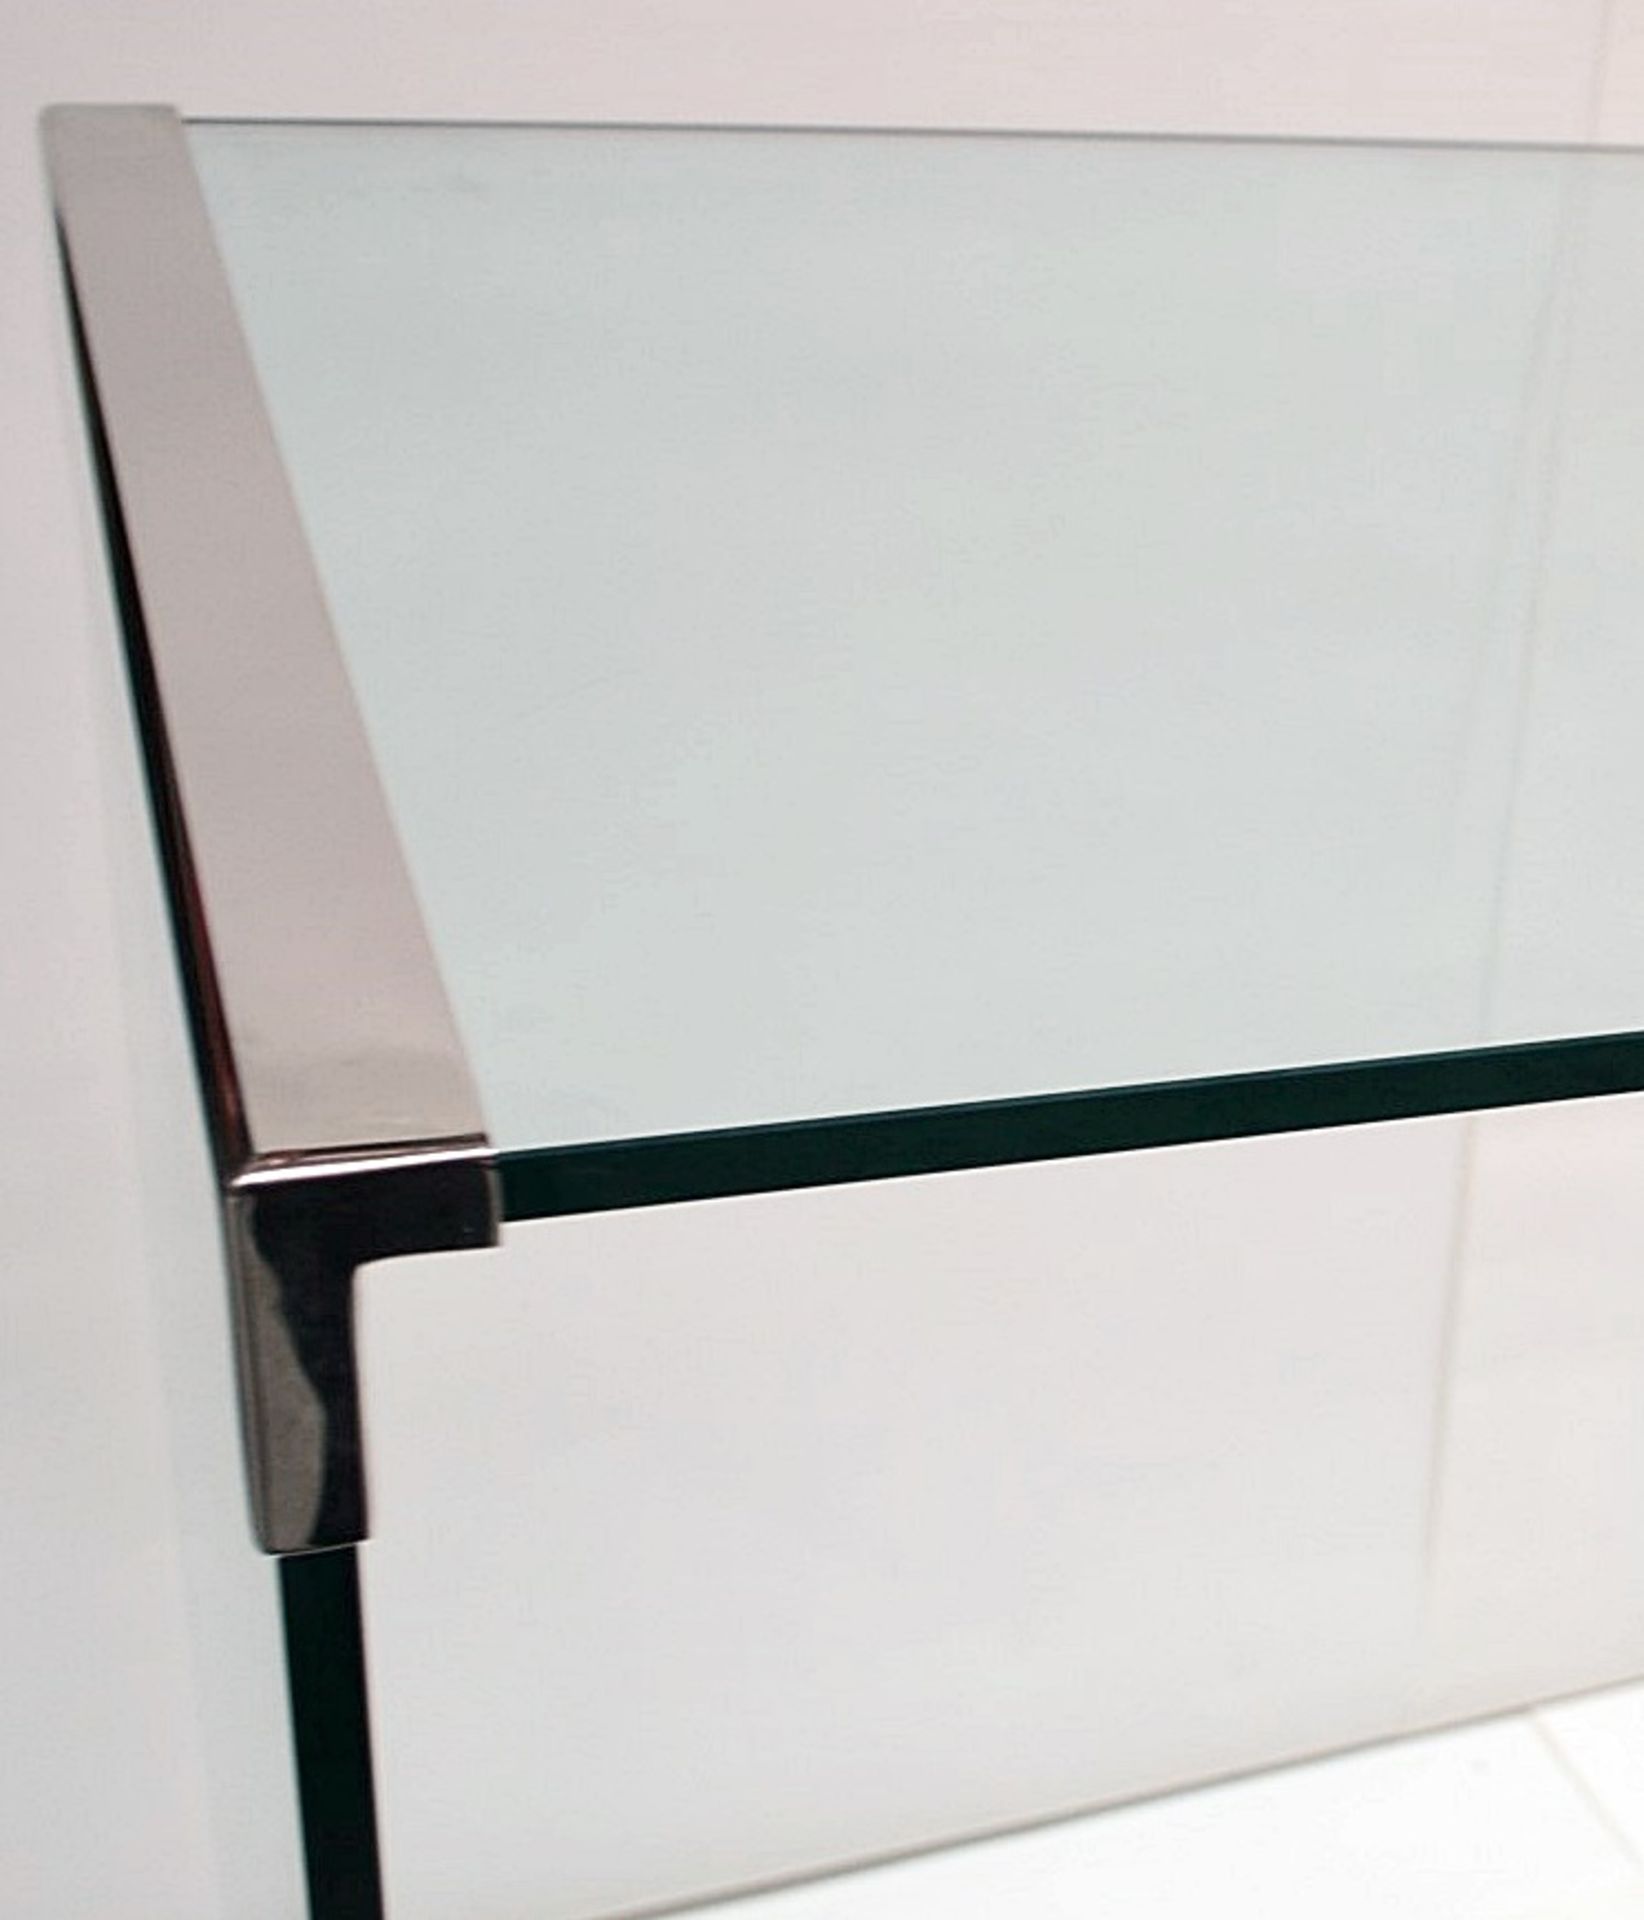 1 x FENDI Canova Glass Console Table With Chromed Corners - Dimensions: W170 x D65 x H99cm, Glass - Image 9 of 10